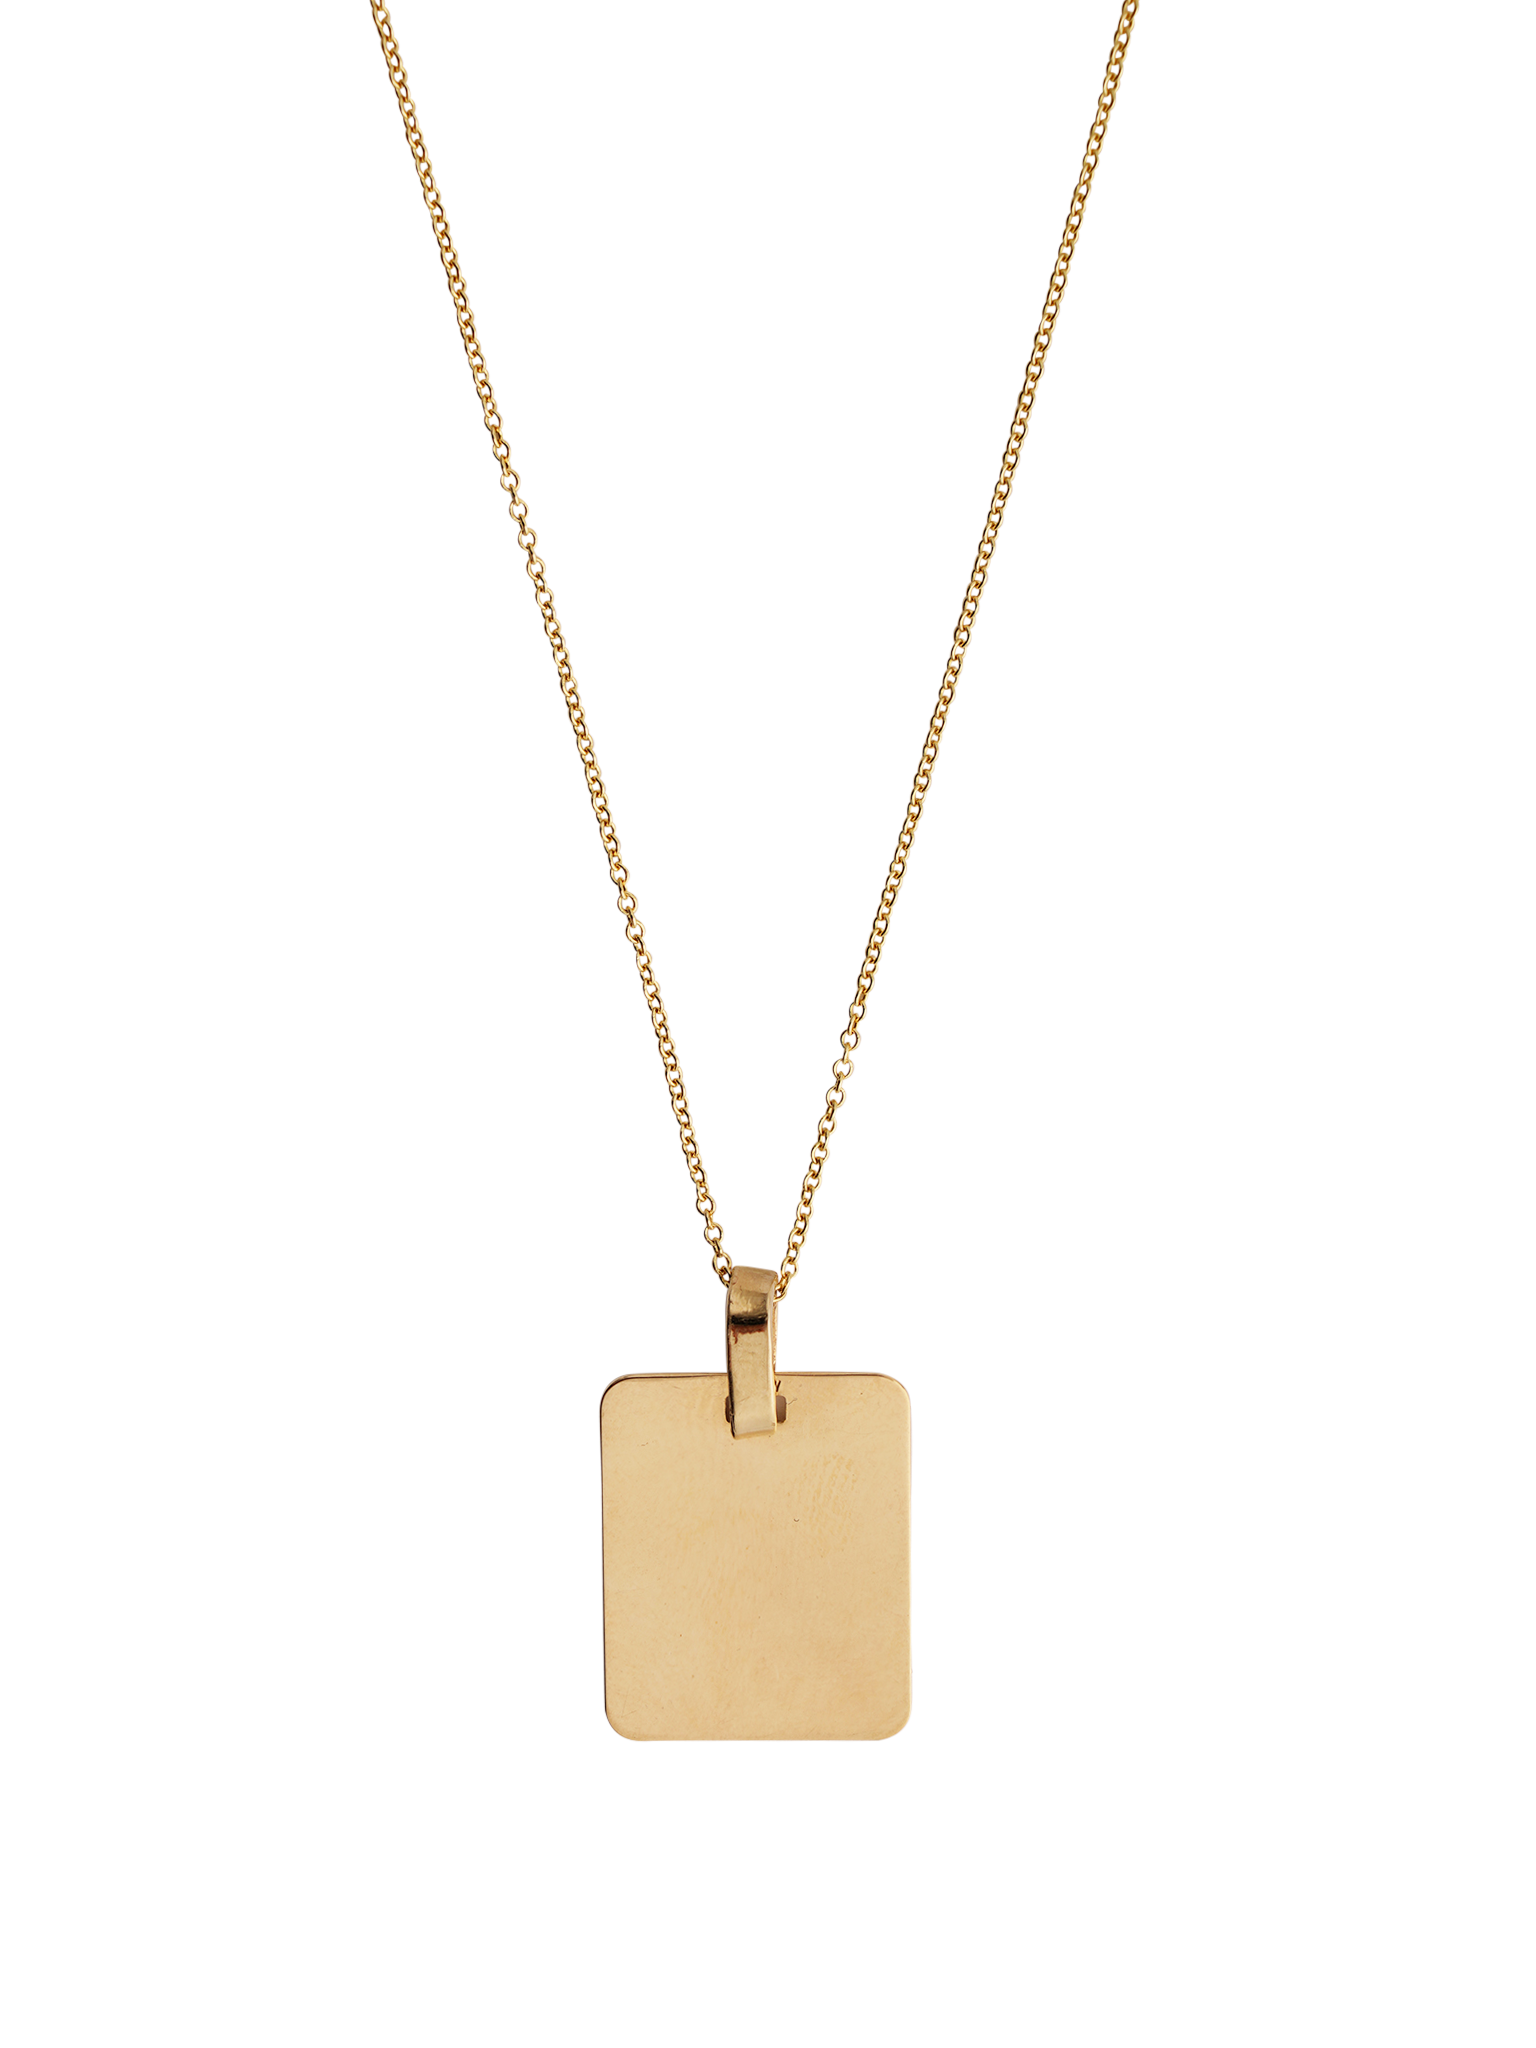 14k yellow gold charm for personalizing with initials on 16-18" 14k gold chain